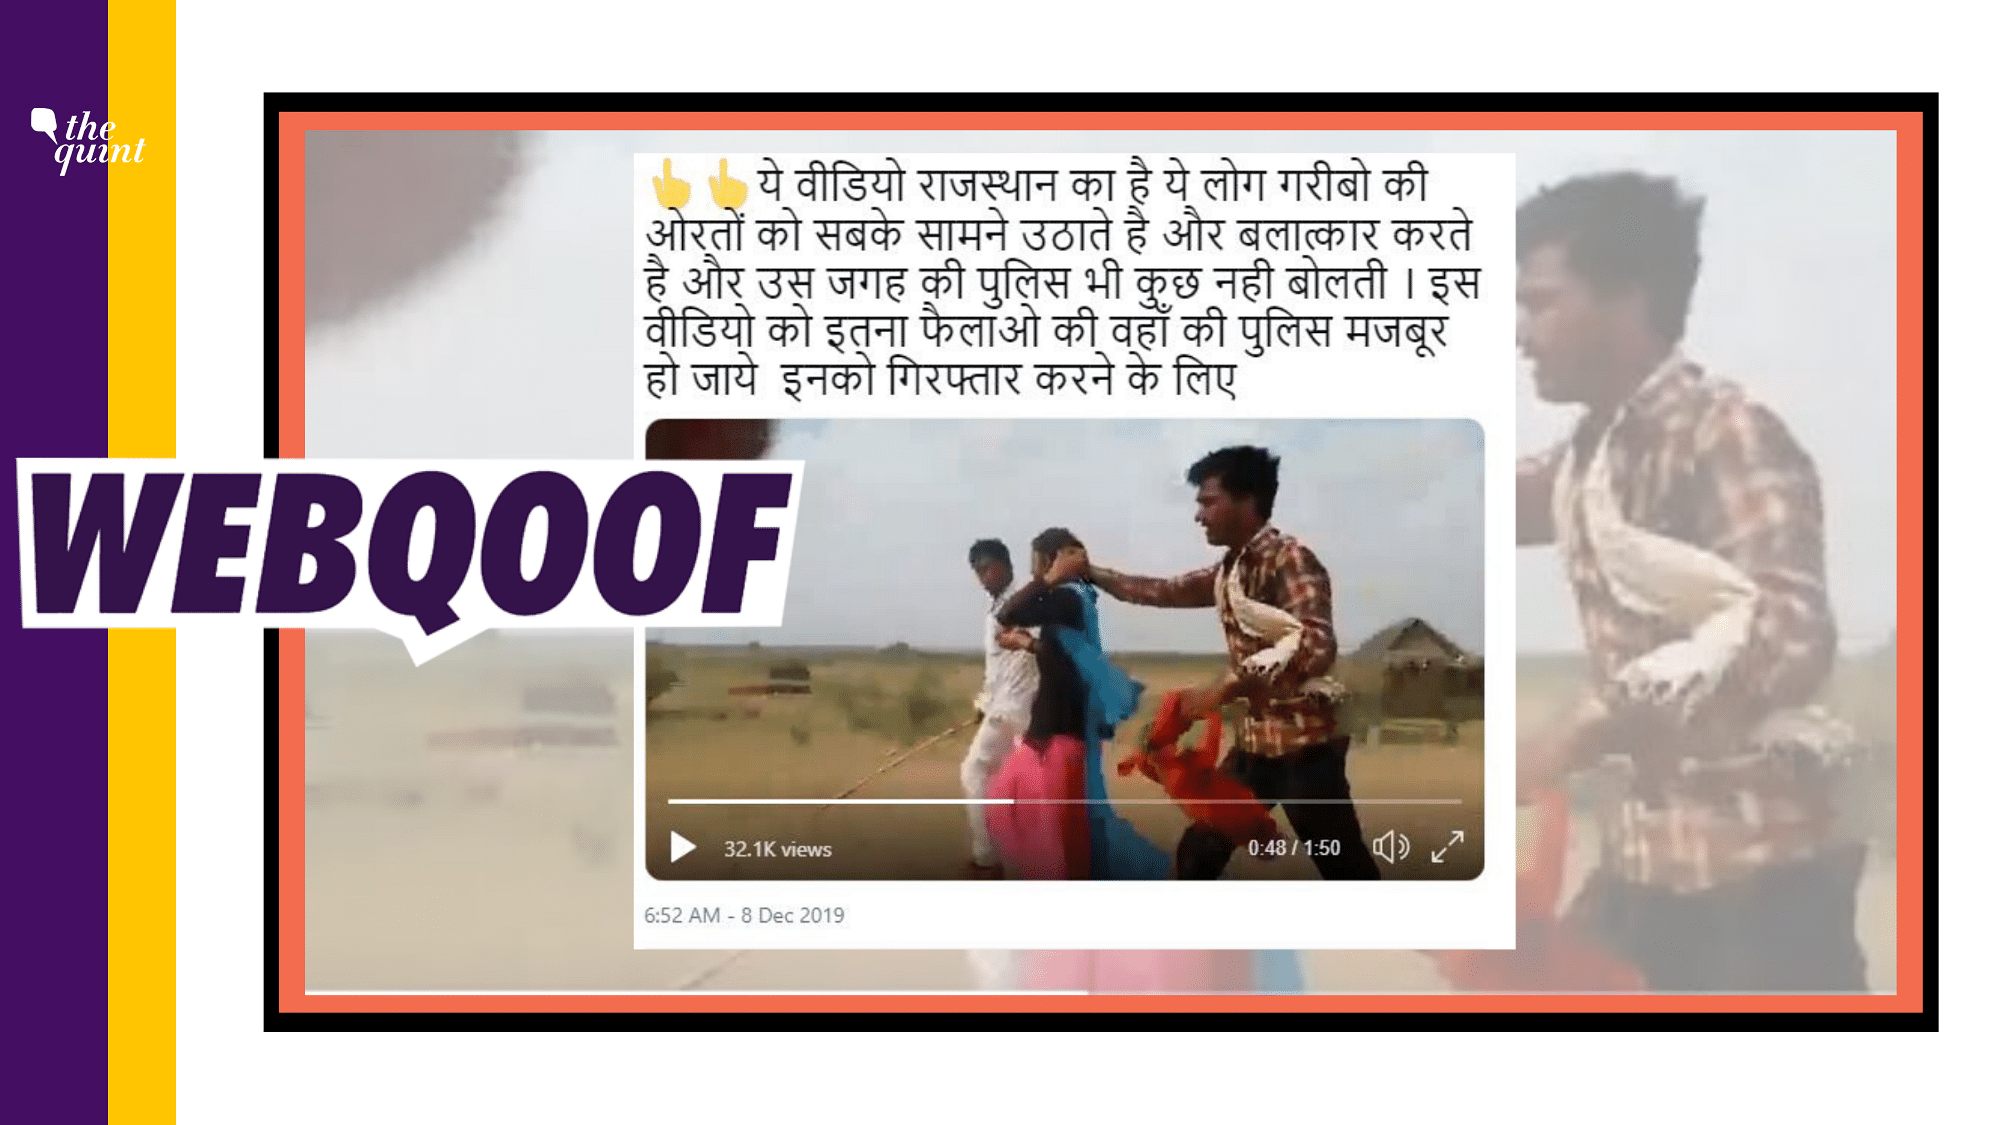 A viral post is being shared with a claim the police has not taken any action against two men from Rajasthan who abduct women from poor families and later rape them.